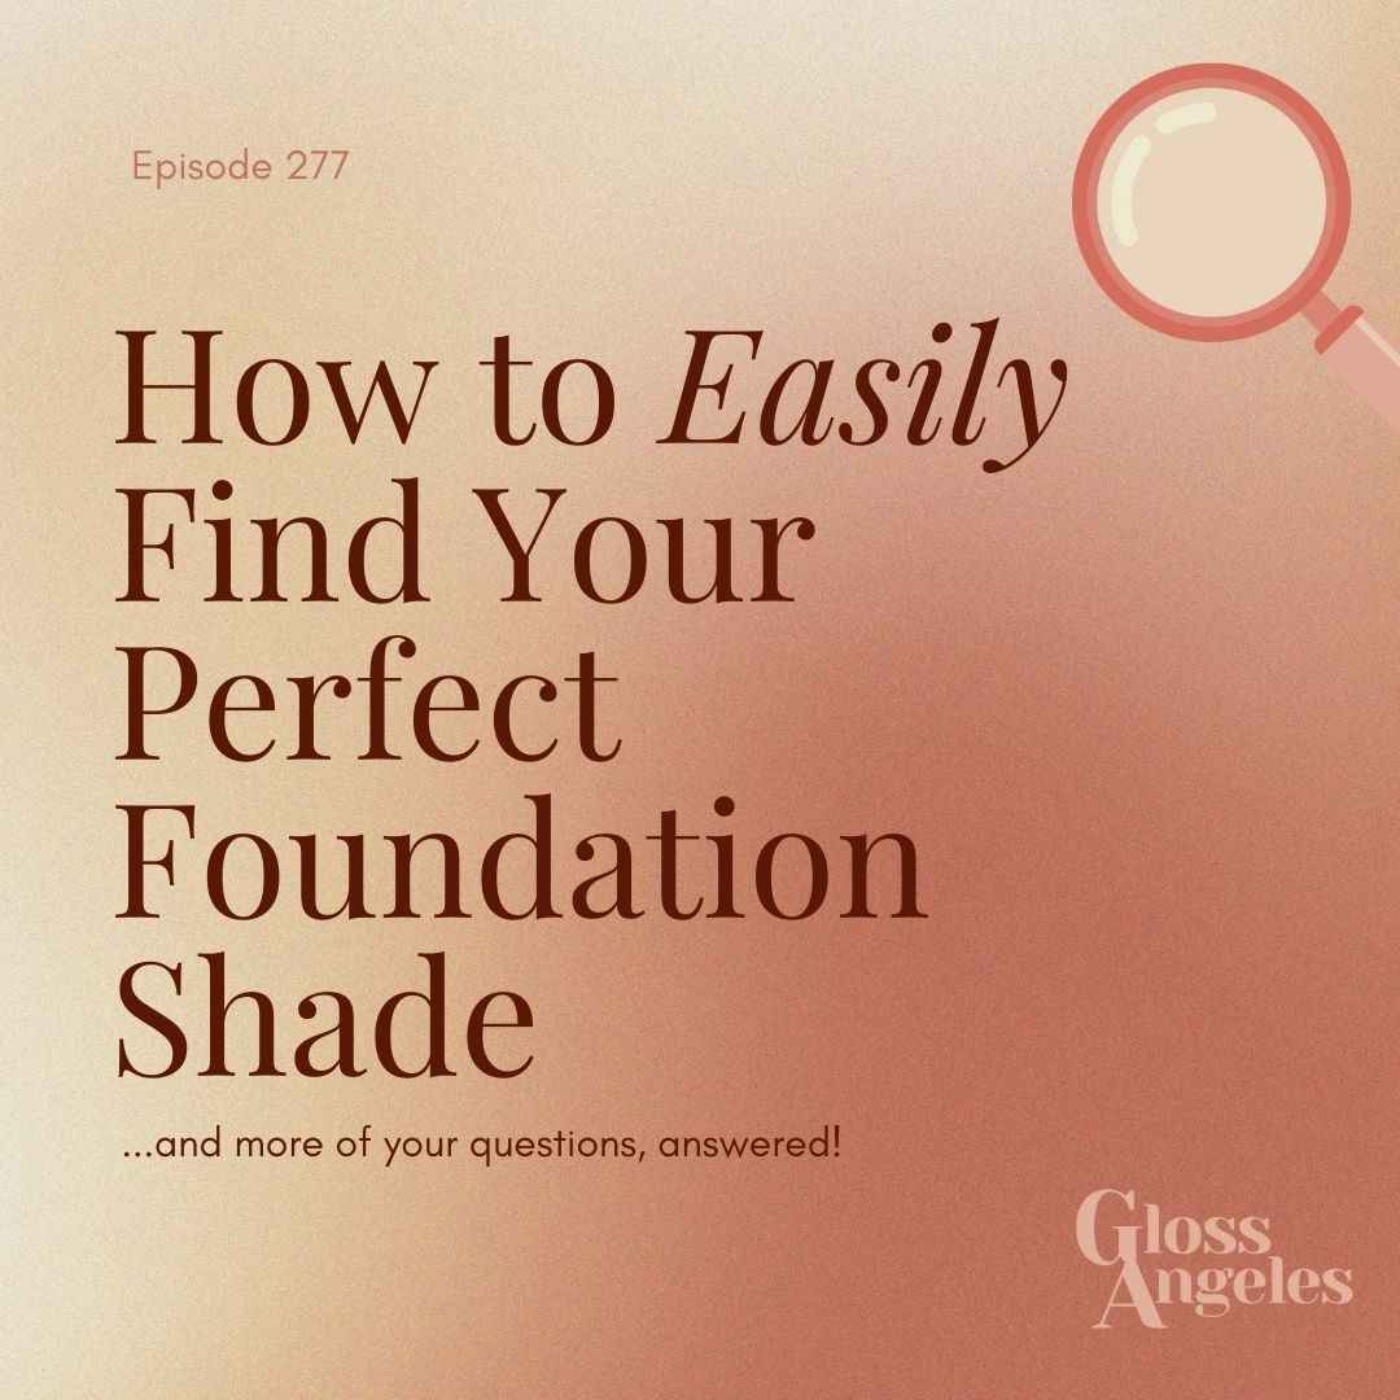 How to Easily Find Your Perfect Foundation and More of Your Questions